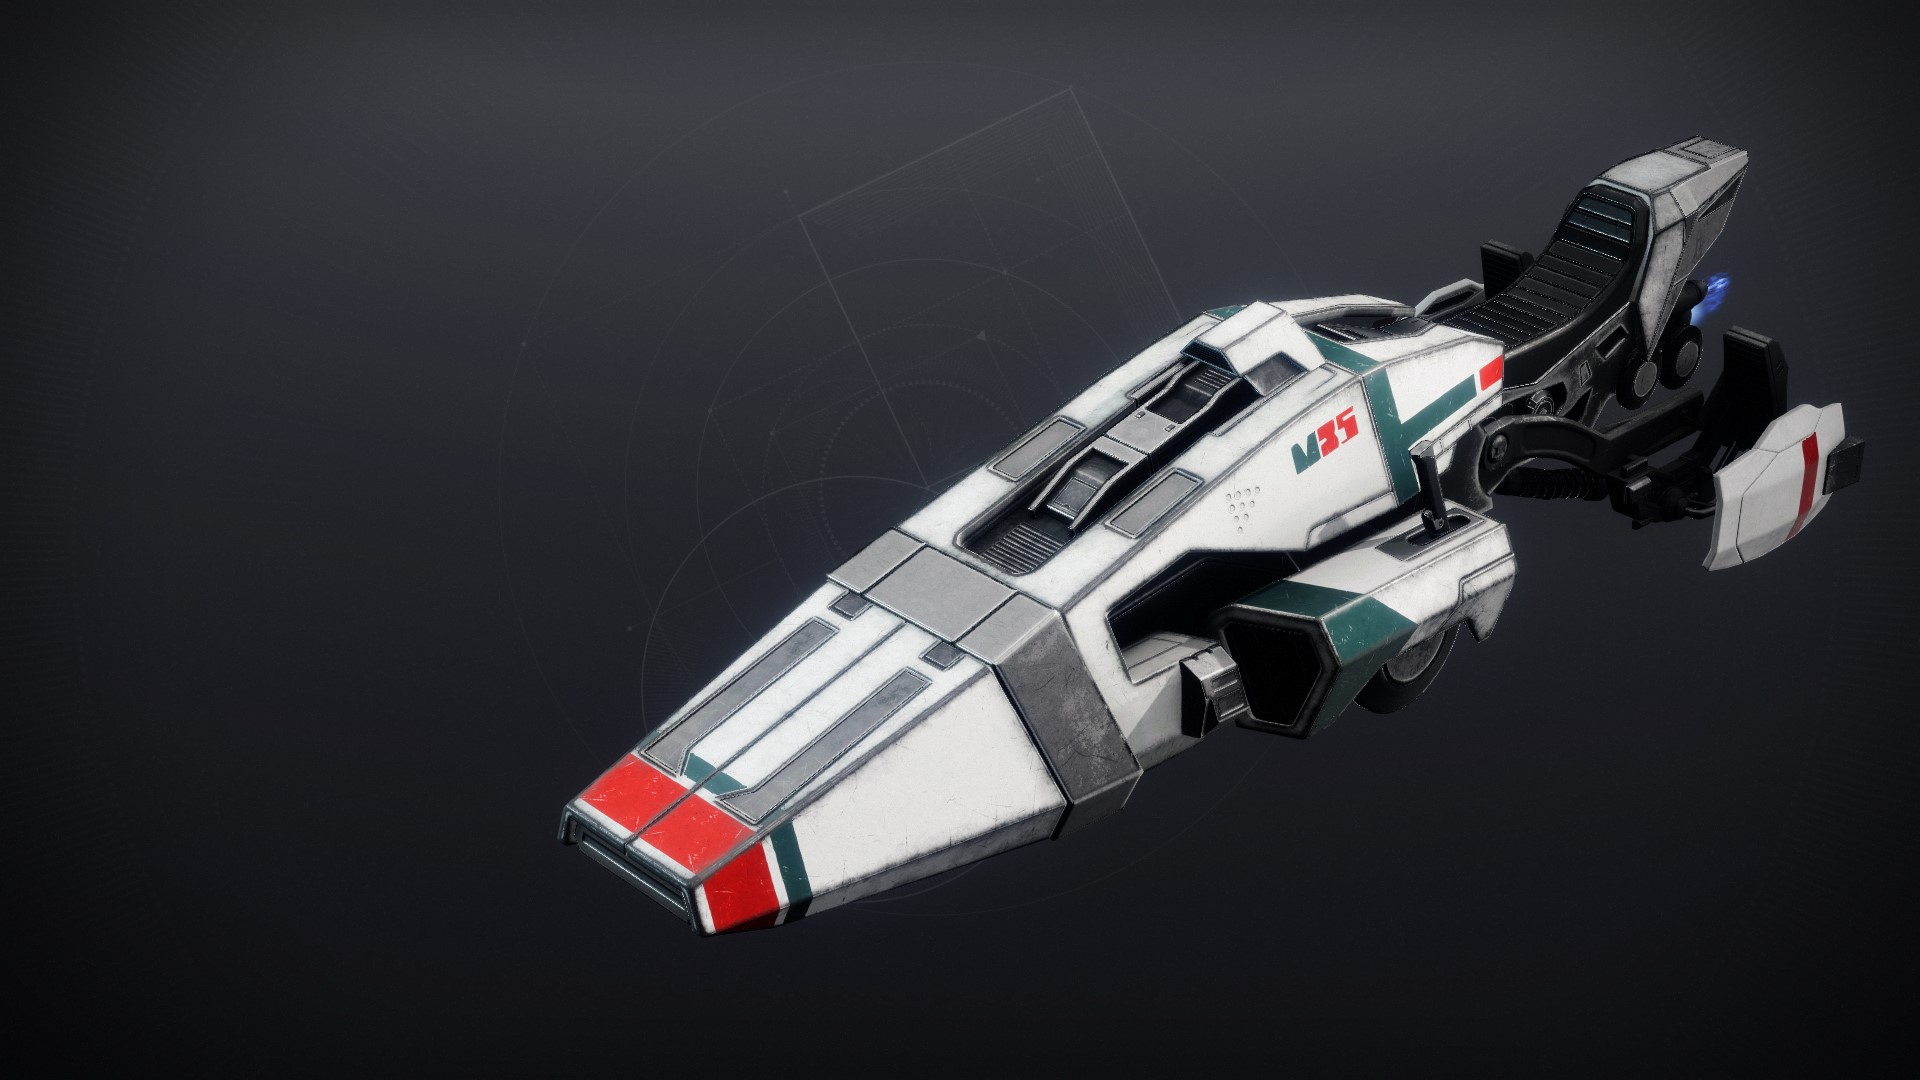 An in-game render of the Alliance Drop Ship.